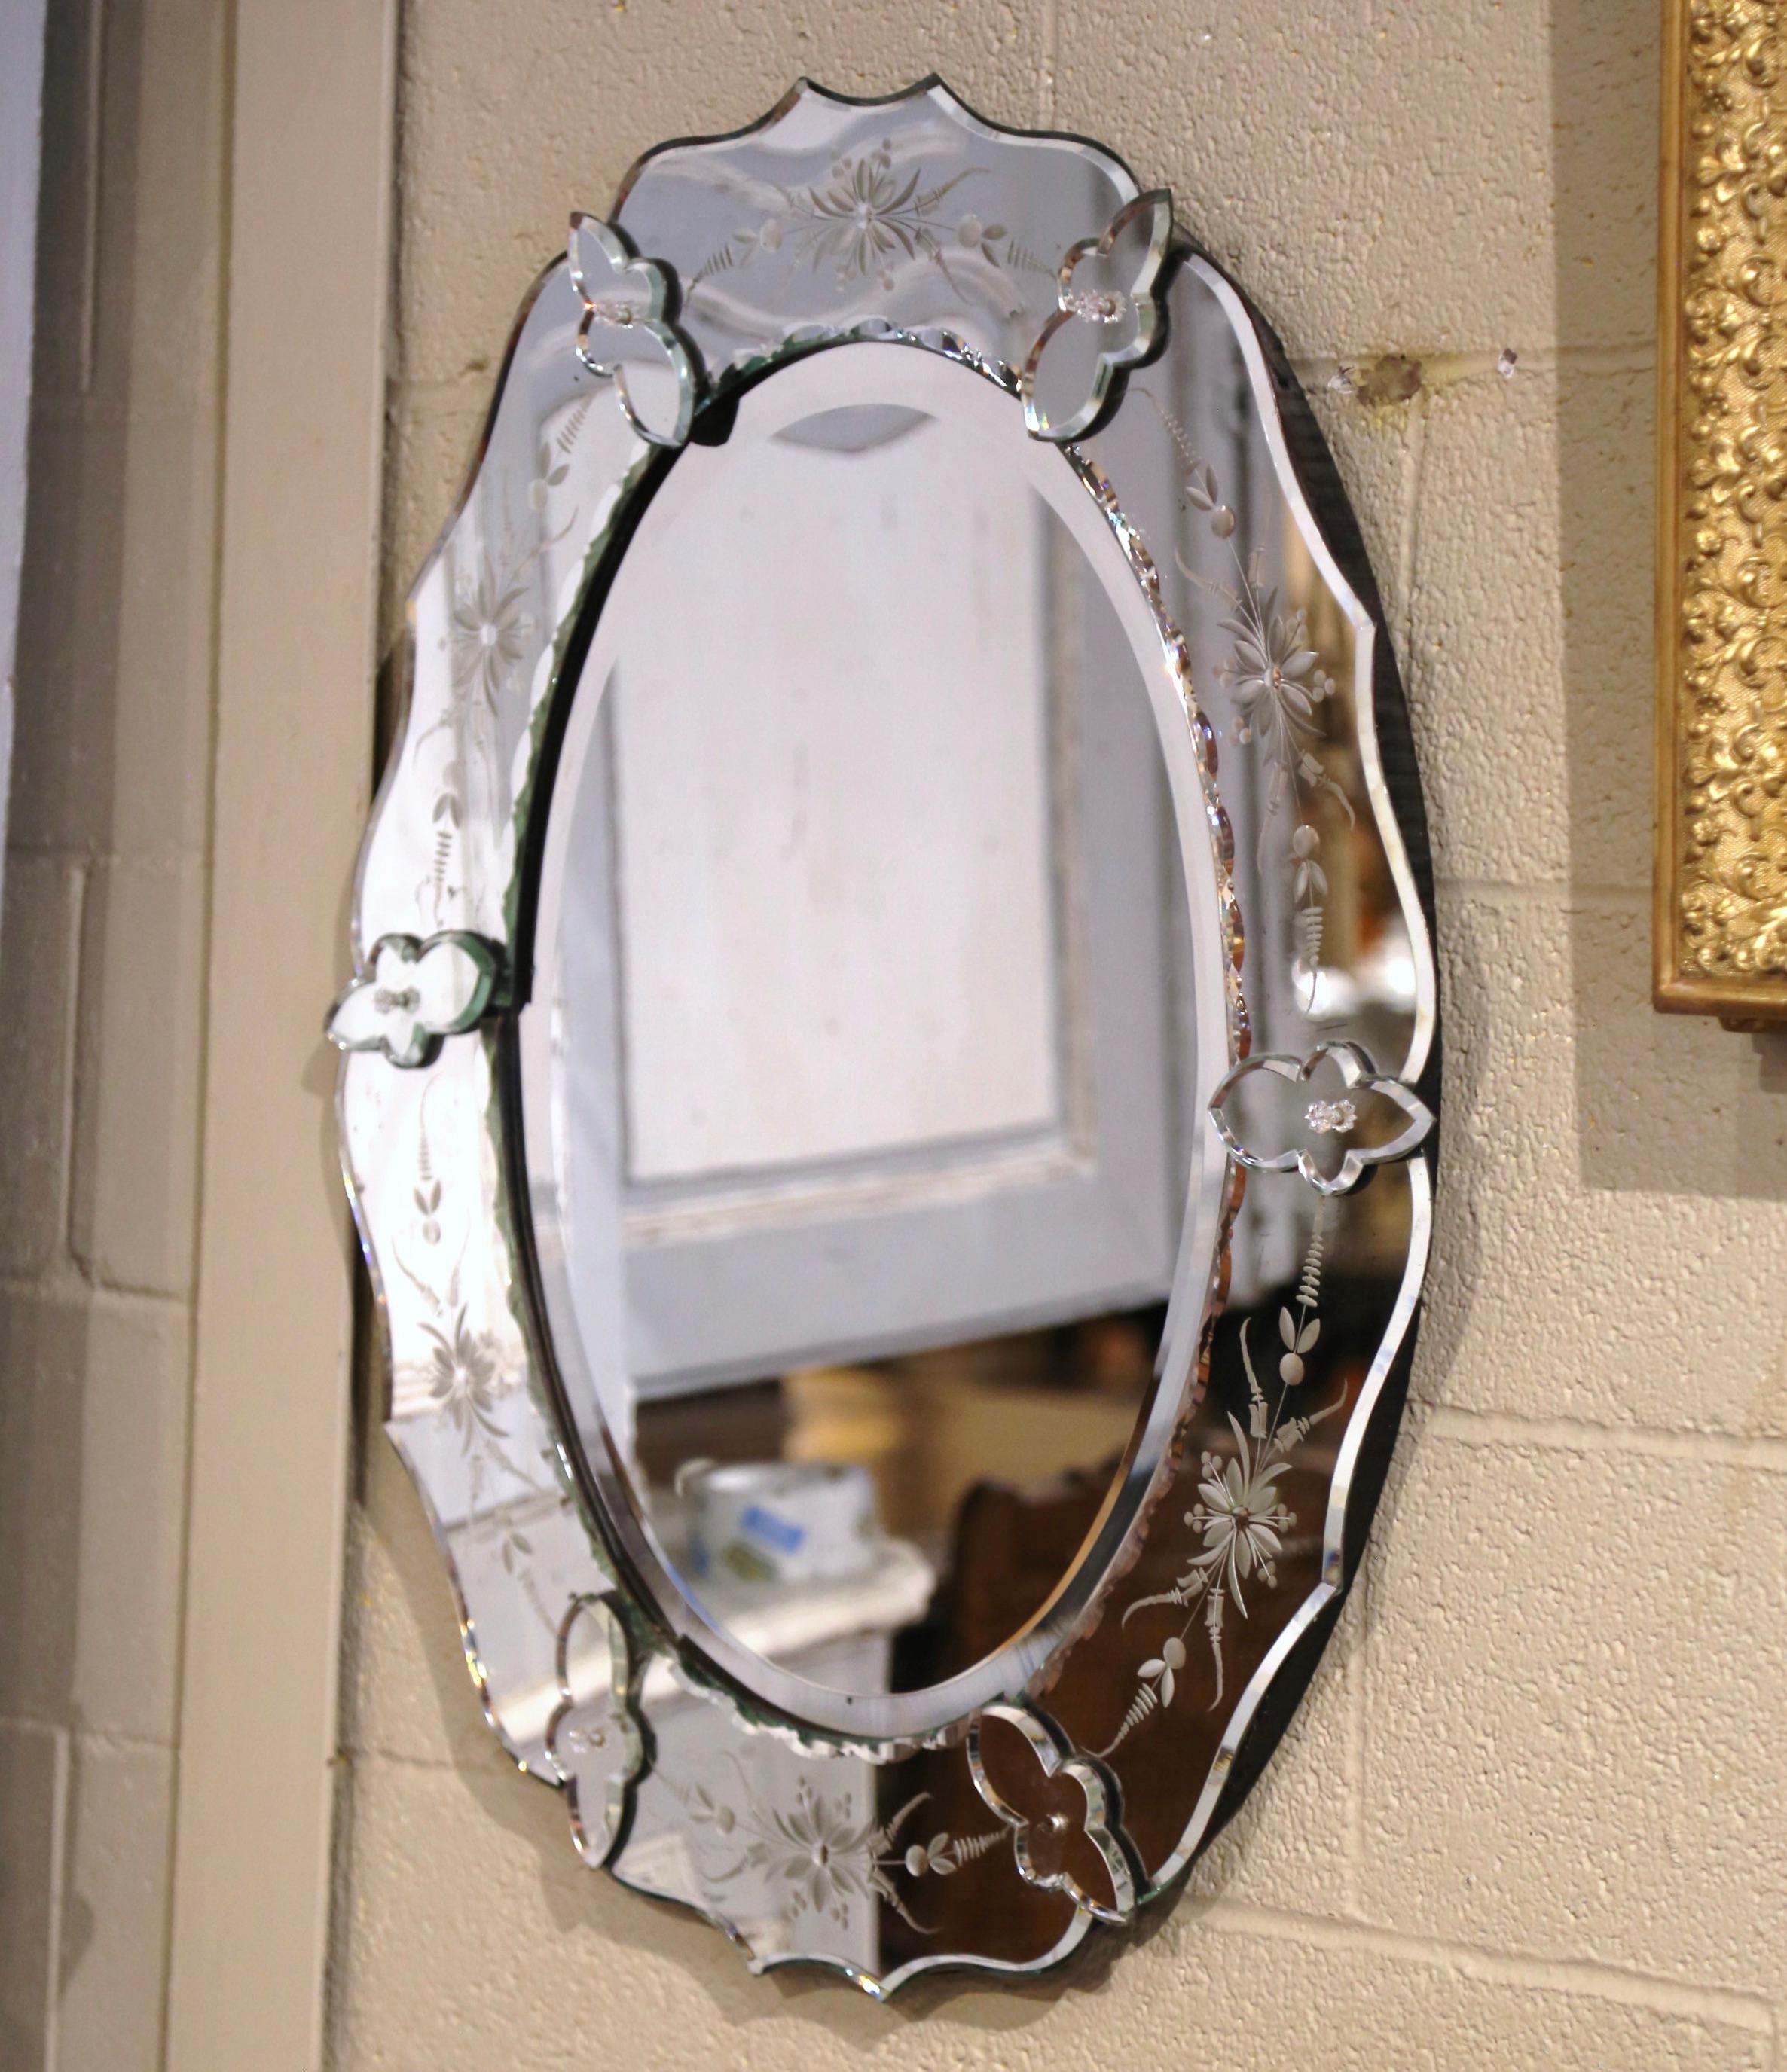 Midcentury Italian Venetian Oval Beveled Mirror with Painted Floral Etching For Sale 1